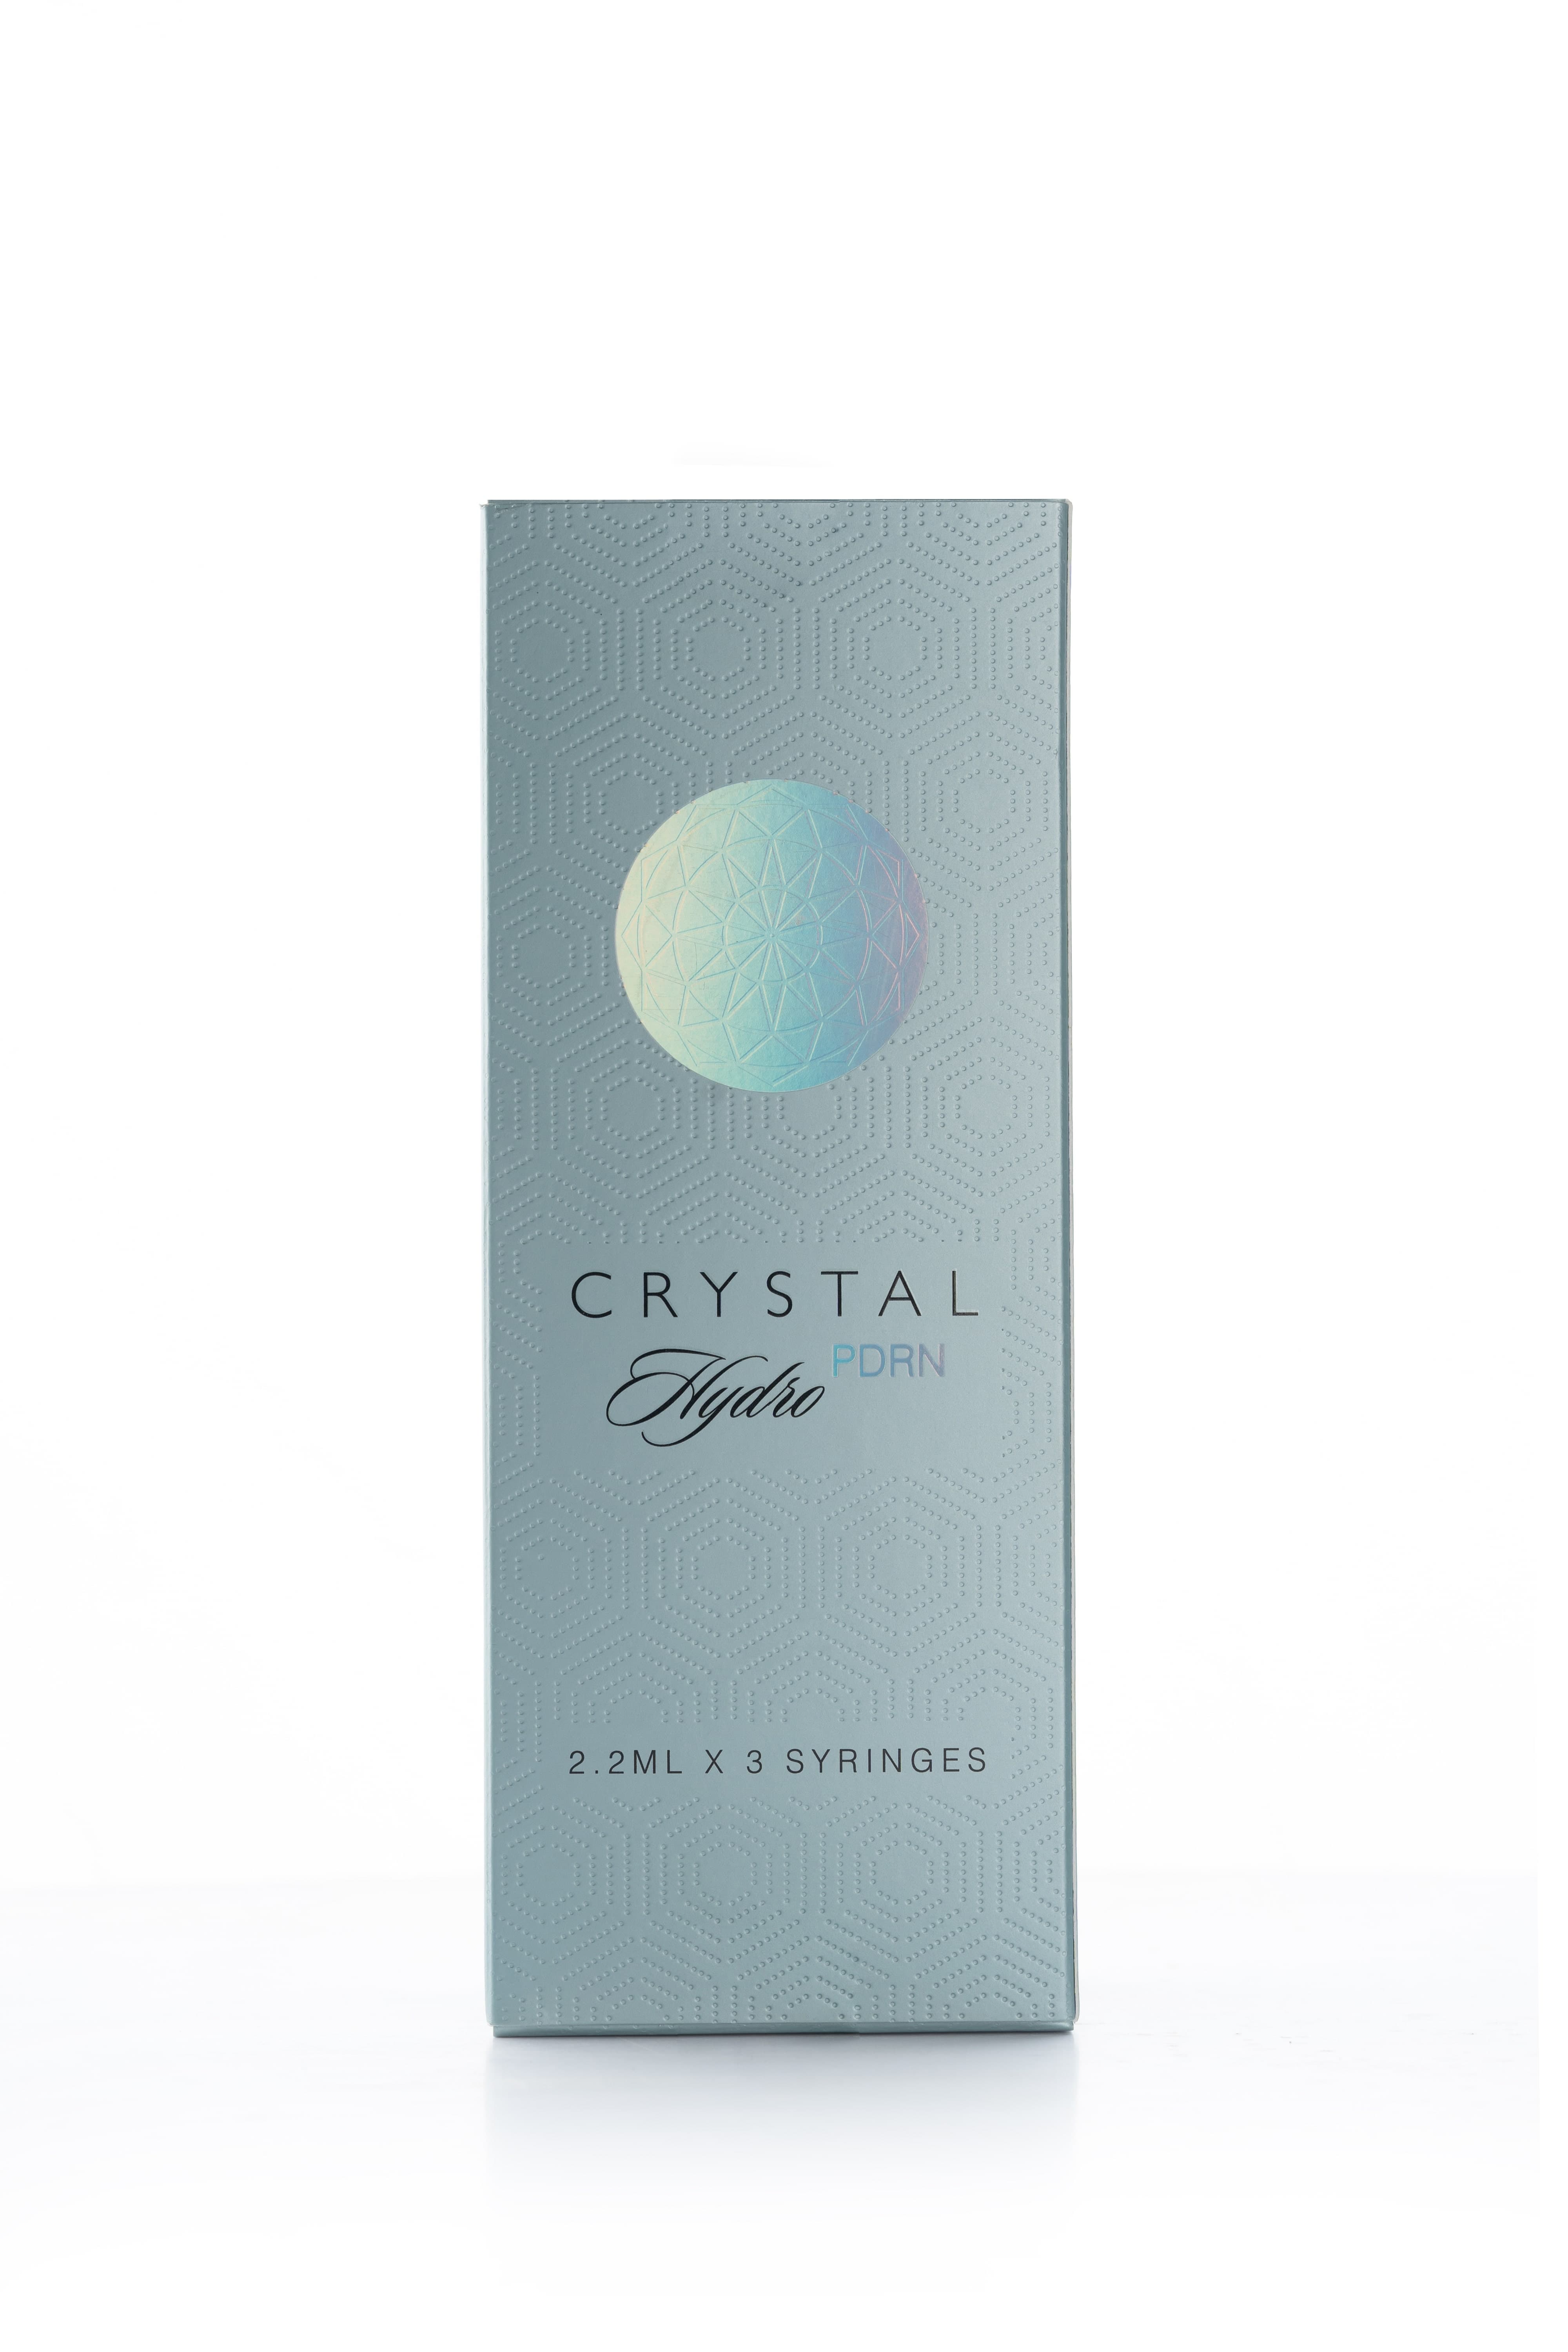 Crystal Hydro PDRN _ Moisturizing and Firming Skin